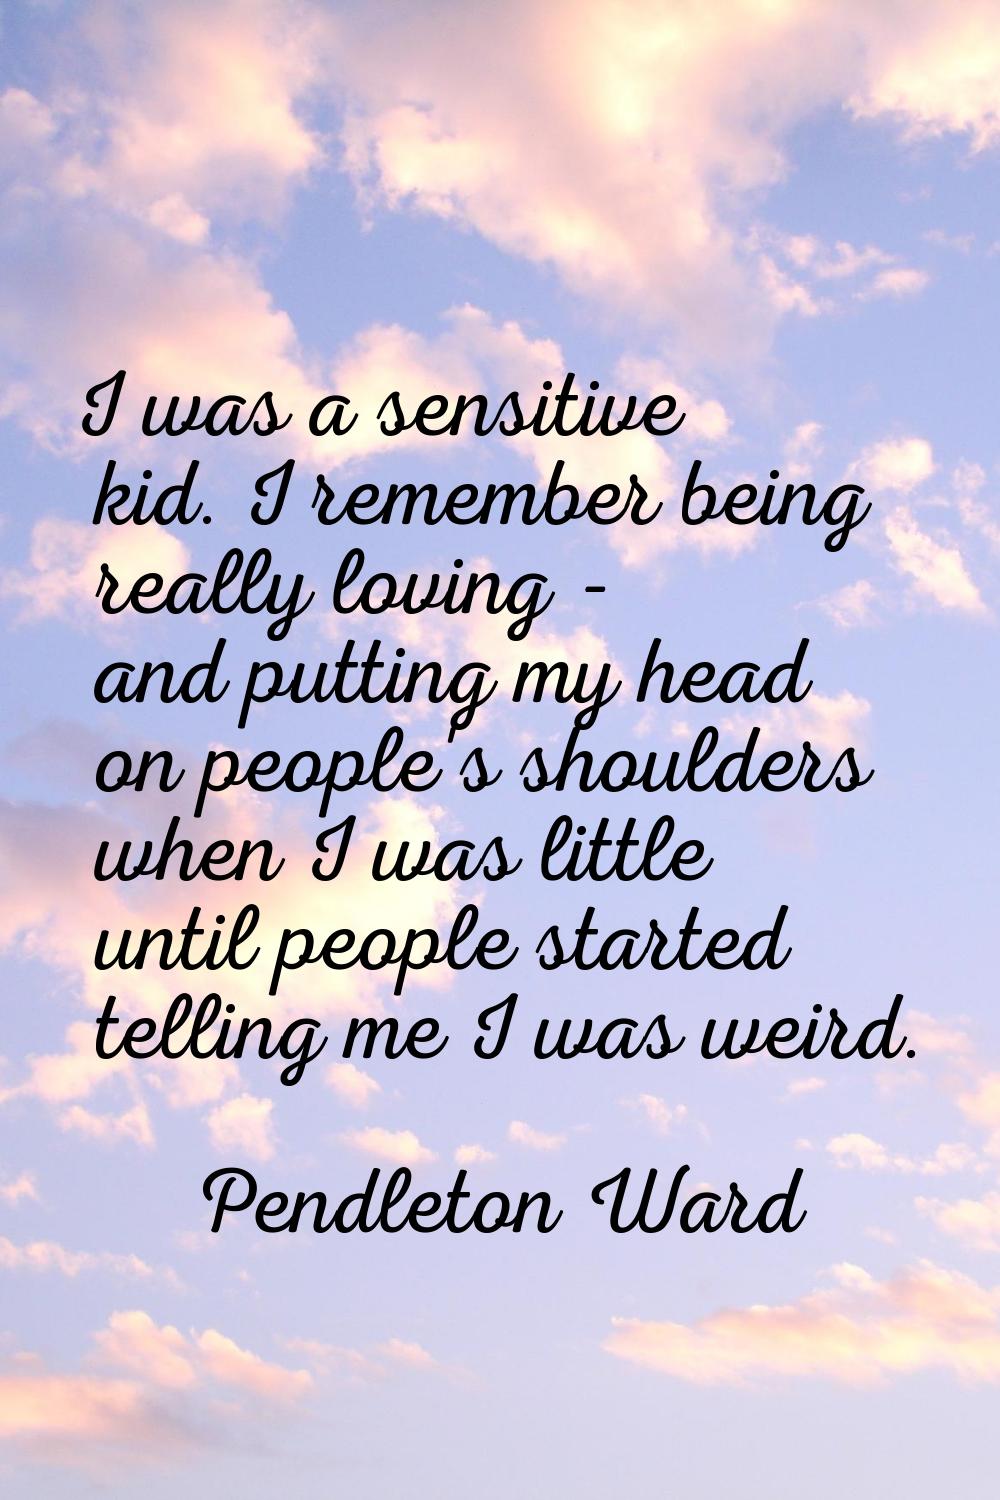 I was a sensitive kid. I remember being really loving - and putting my head on people's shoulders w